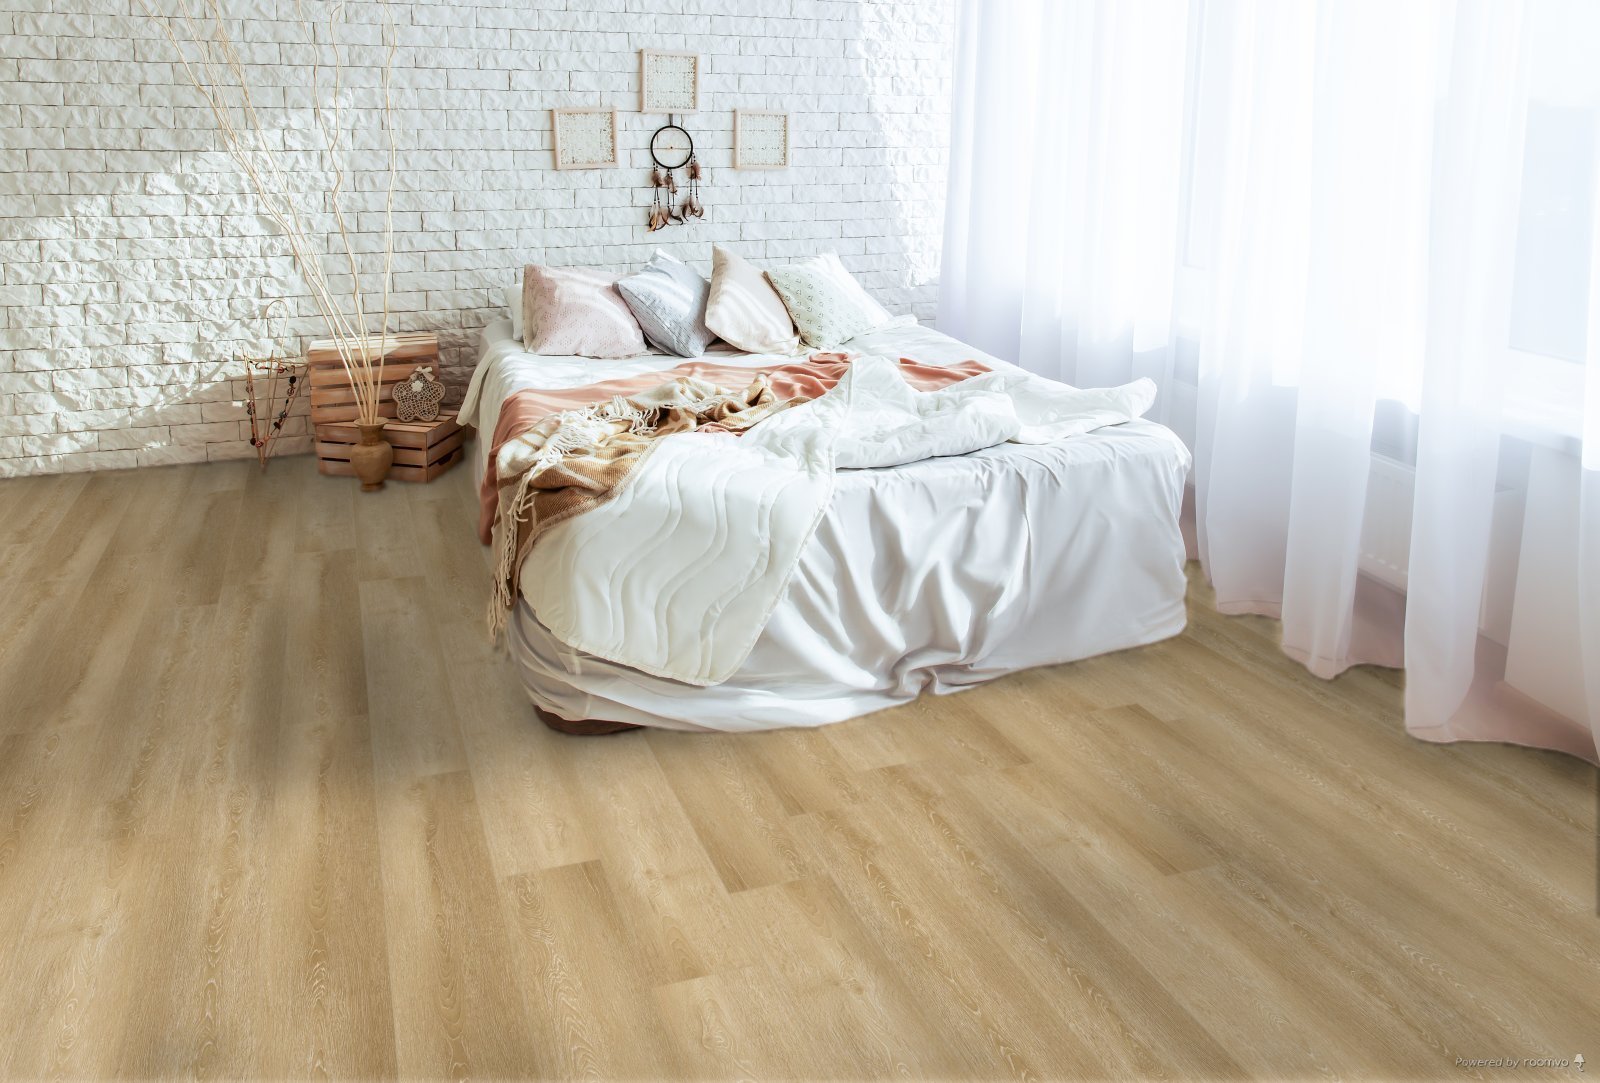 Horizen Flooring presents to you a picture of a quality wide plank Brahms luxury vinyl plank. NovoCore Q XXL Tango collection features a wide range of colors & designs that will compliment any interior. Natural wood grain synchronized surface allow for an authentic hardwood look & feel. This collection features a 0.3″ / 7.5 mm overall thickness and a durable 22 mil / 0.55 mm wear layer for residential and commercial applications.